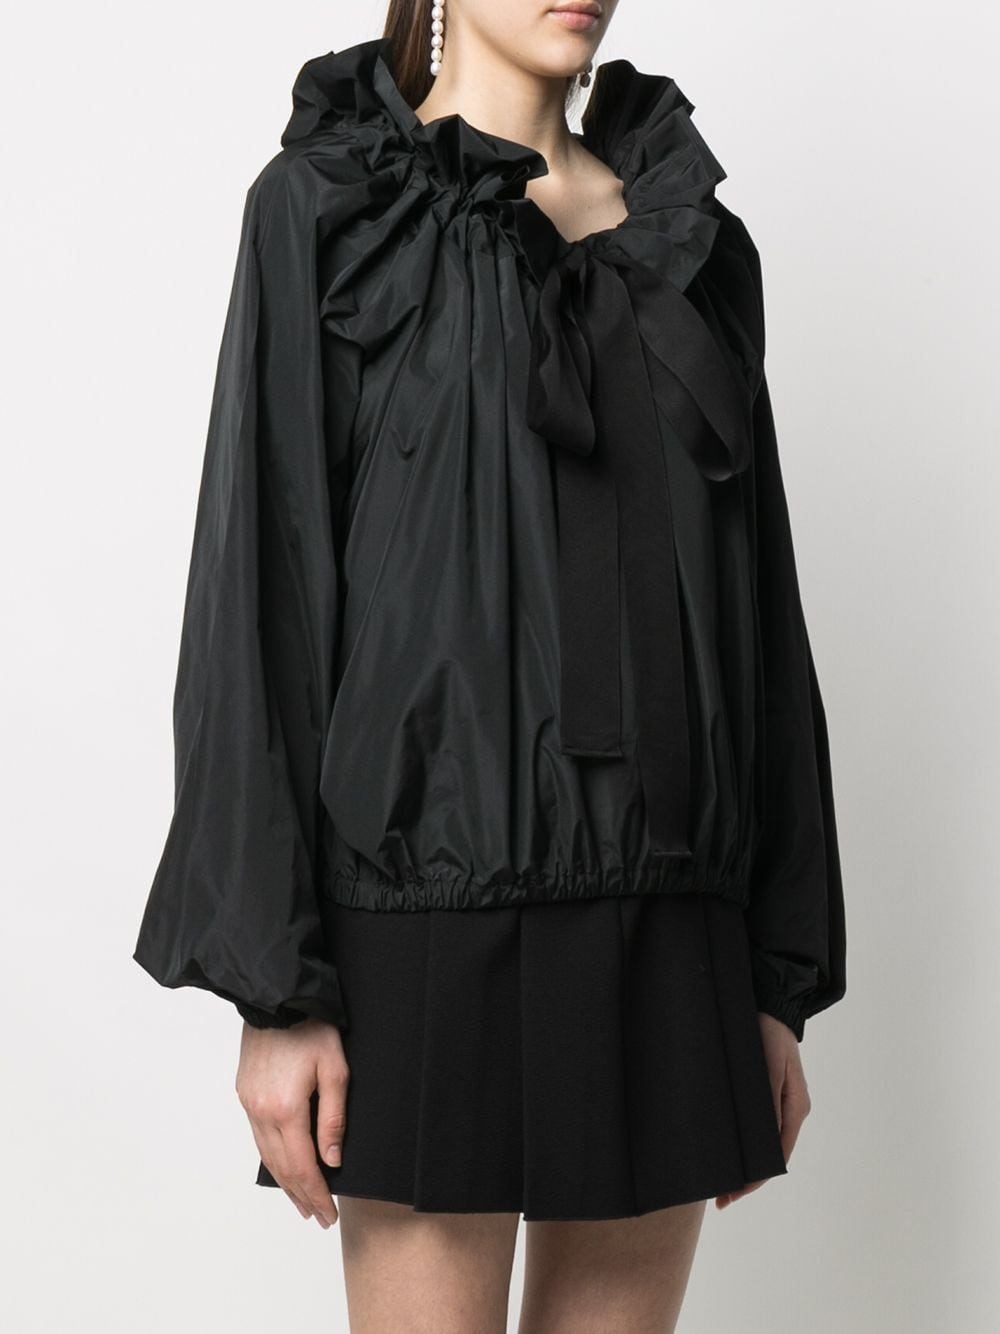 Black ruffle-trimmed blouse